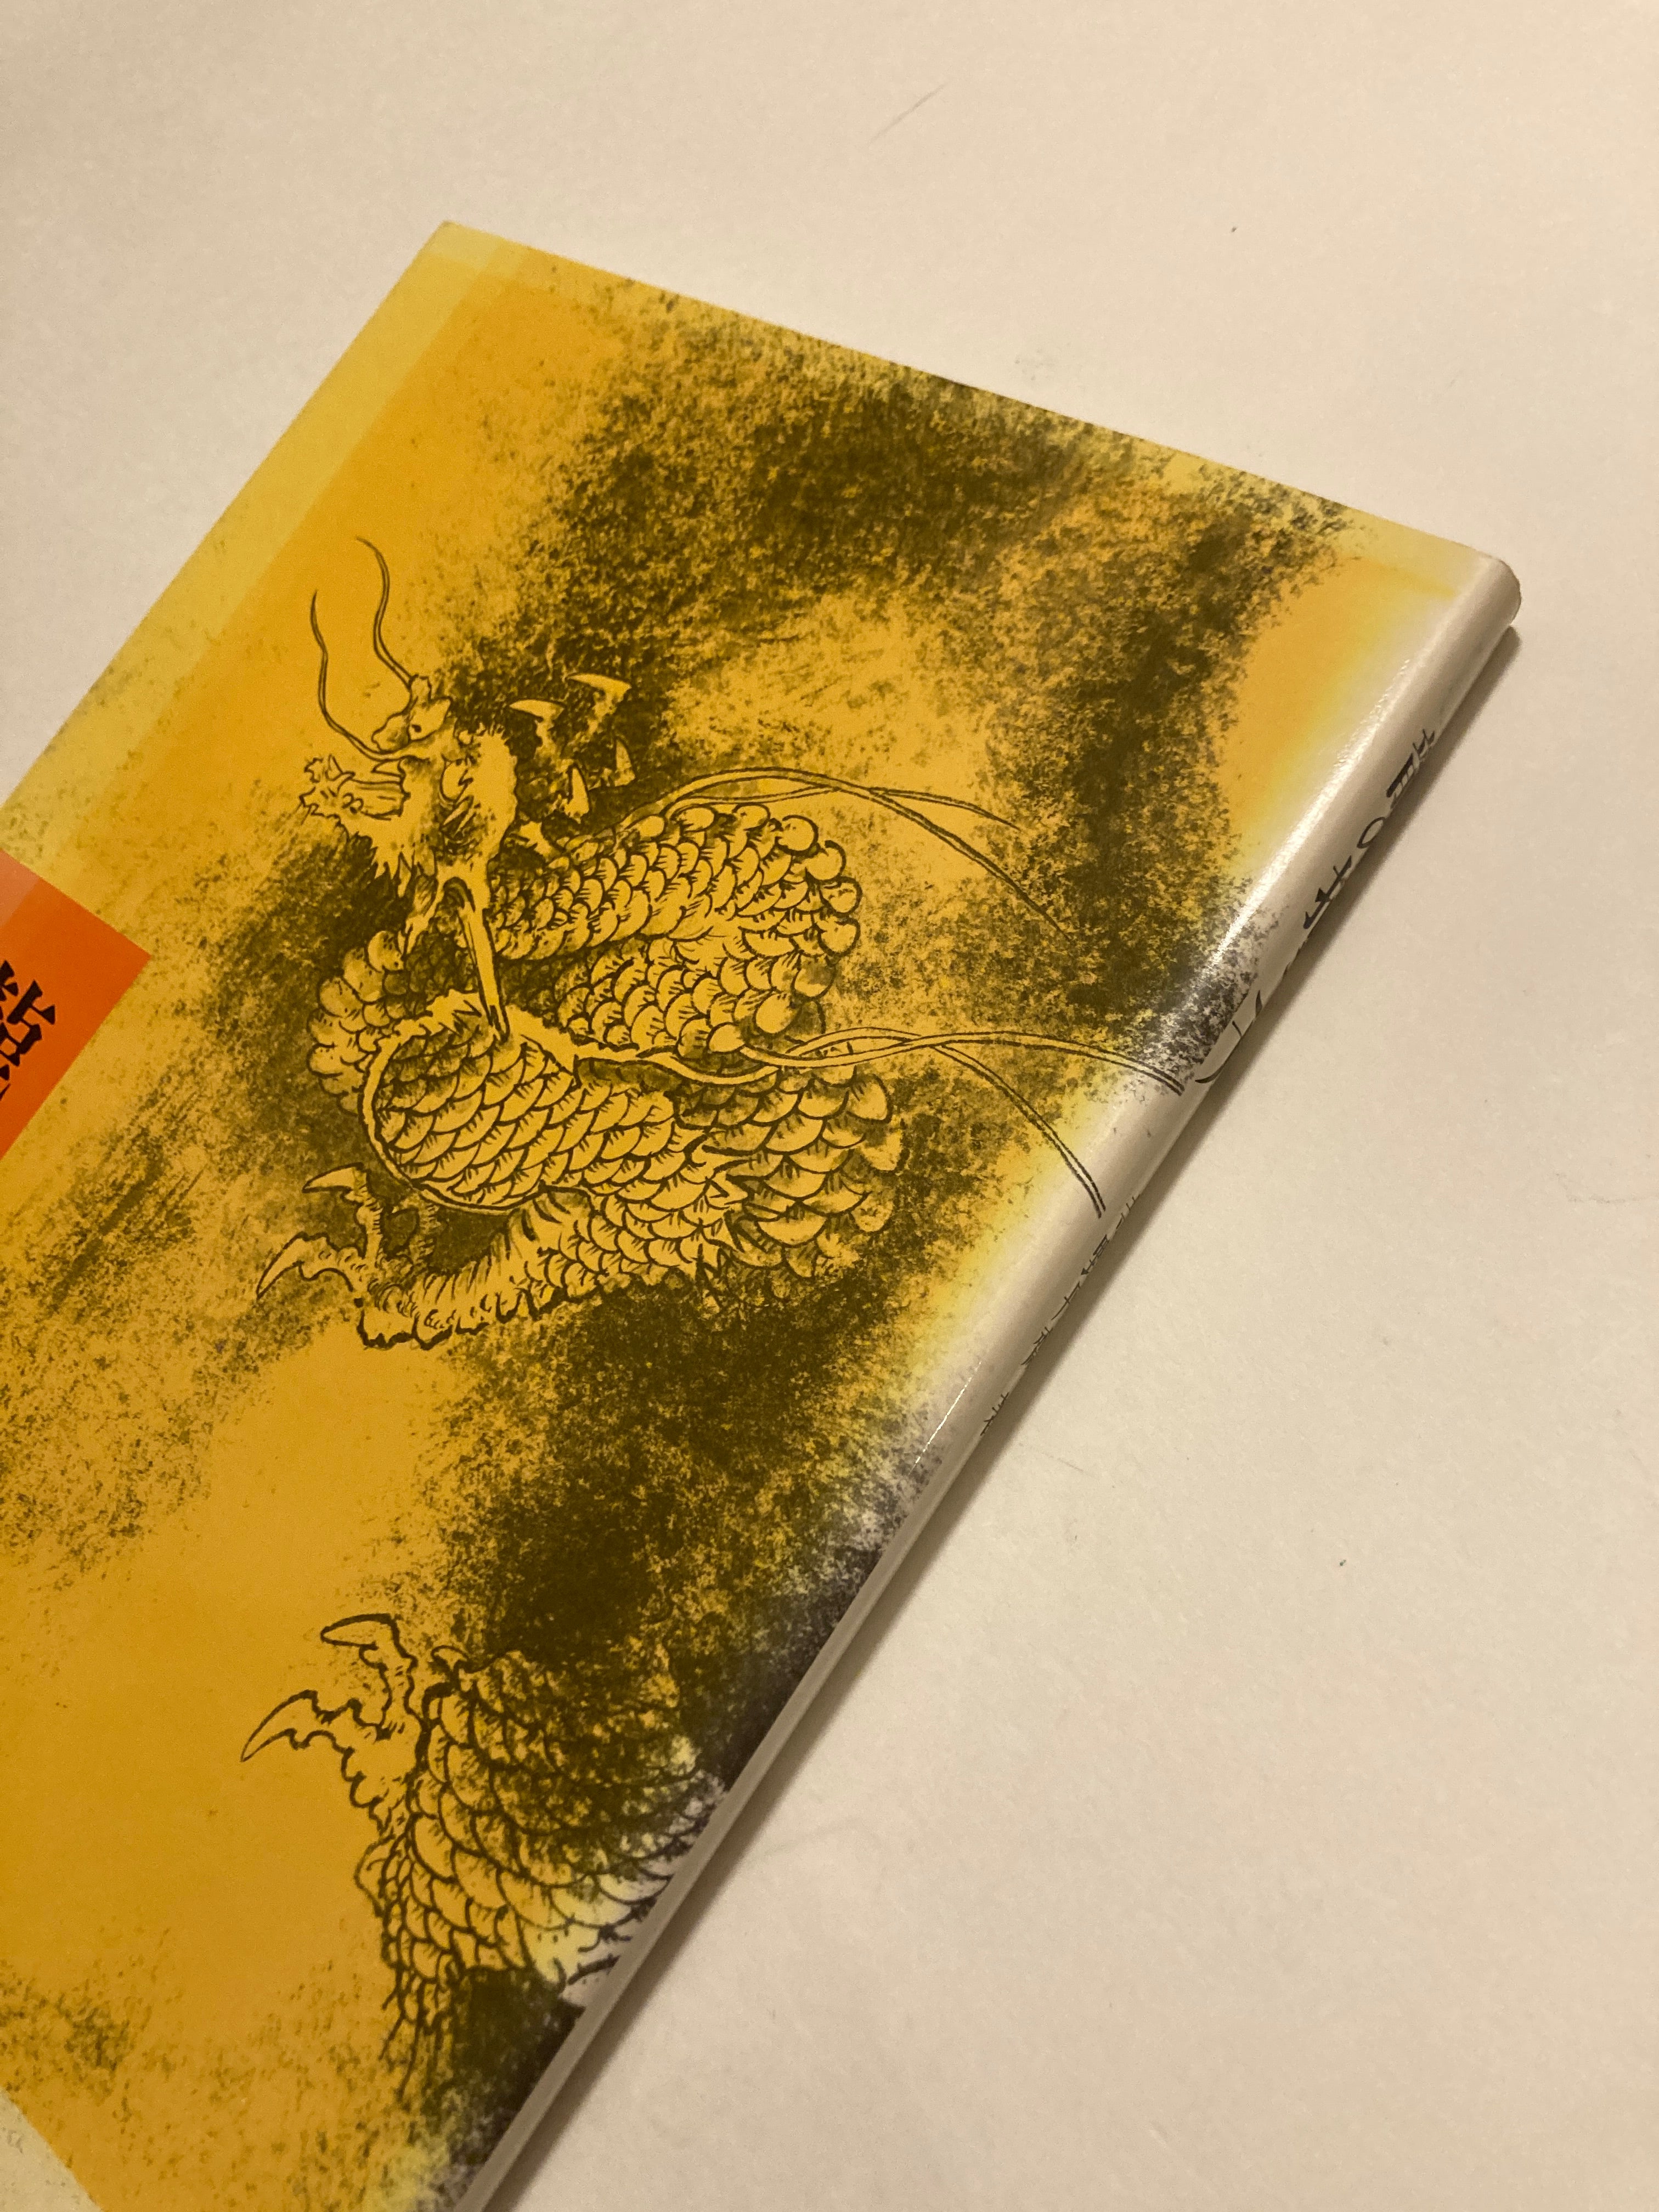 Japanese Writing Practice Book: Gold Dragon Cover With